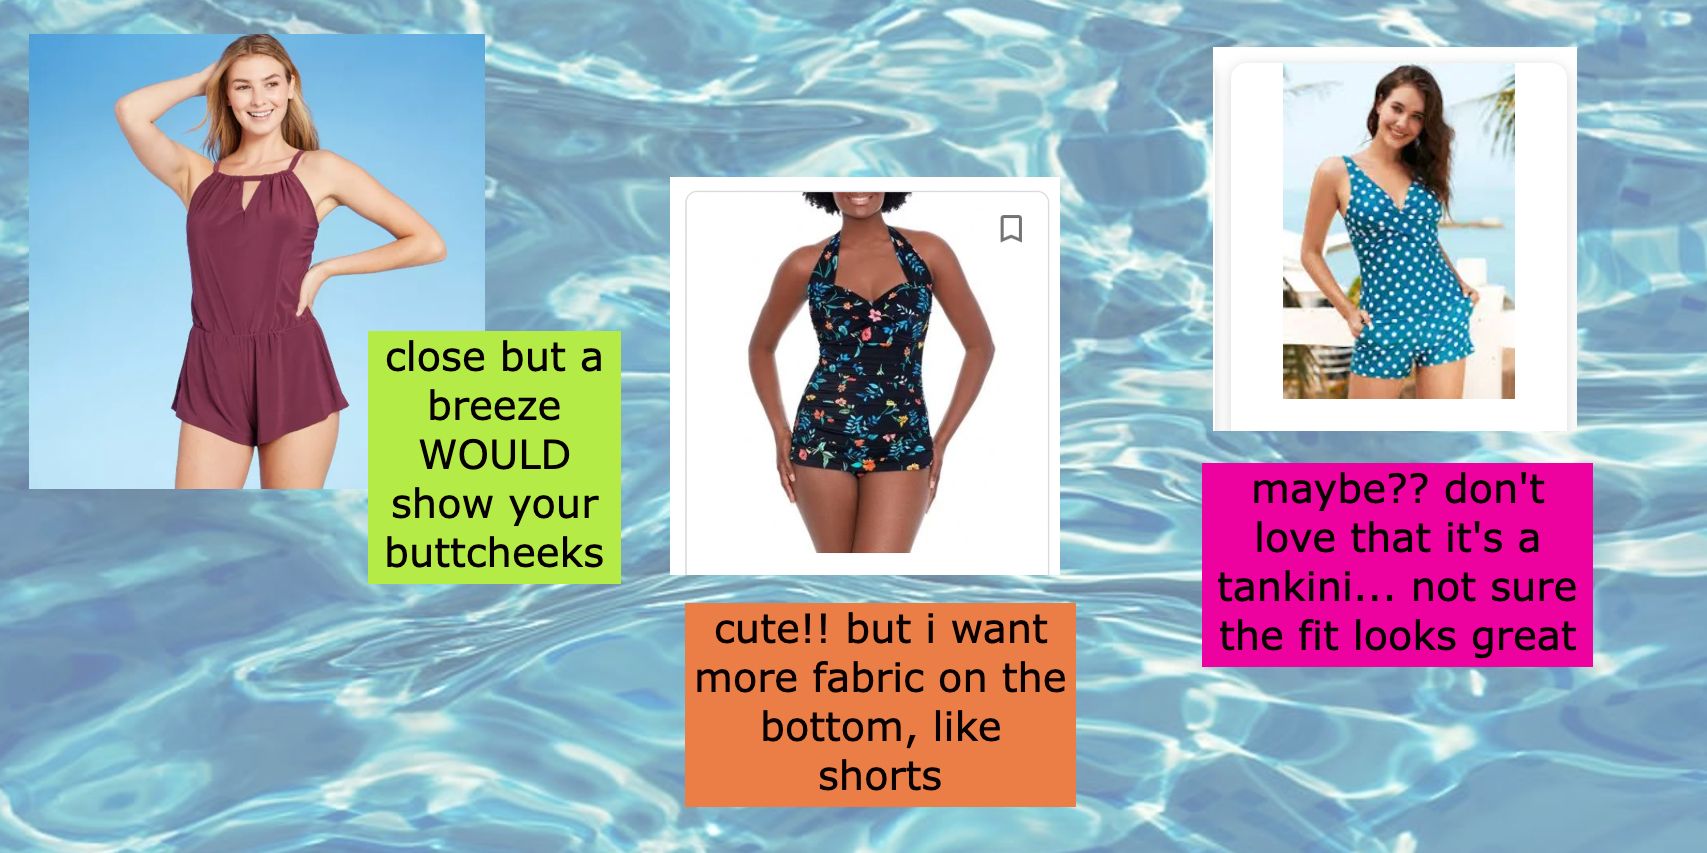 three examples of full-coverage swimsuits with notes on how they're still lacking - one is too baggy, one is too revealing, and one appears to fit badly